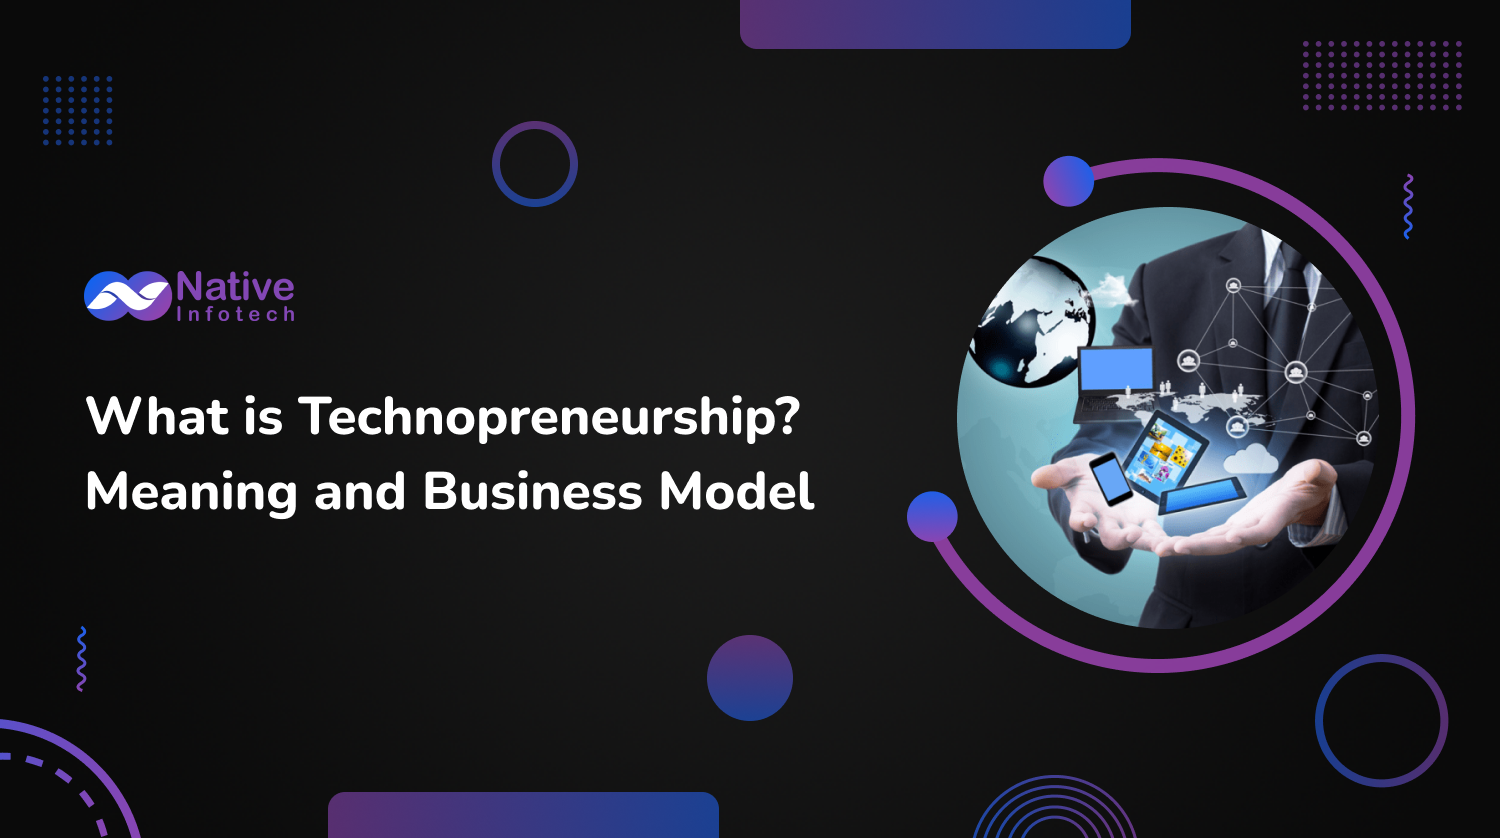 What is Technopreneurship? Meaning and Business Model | Native Infotech